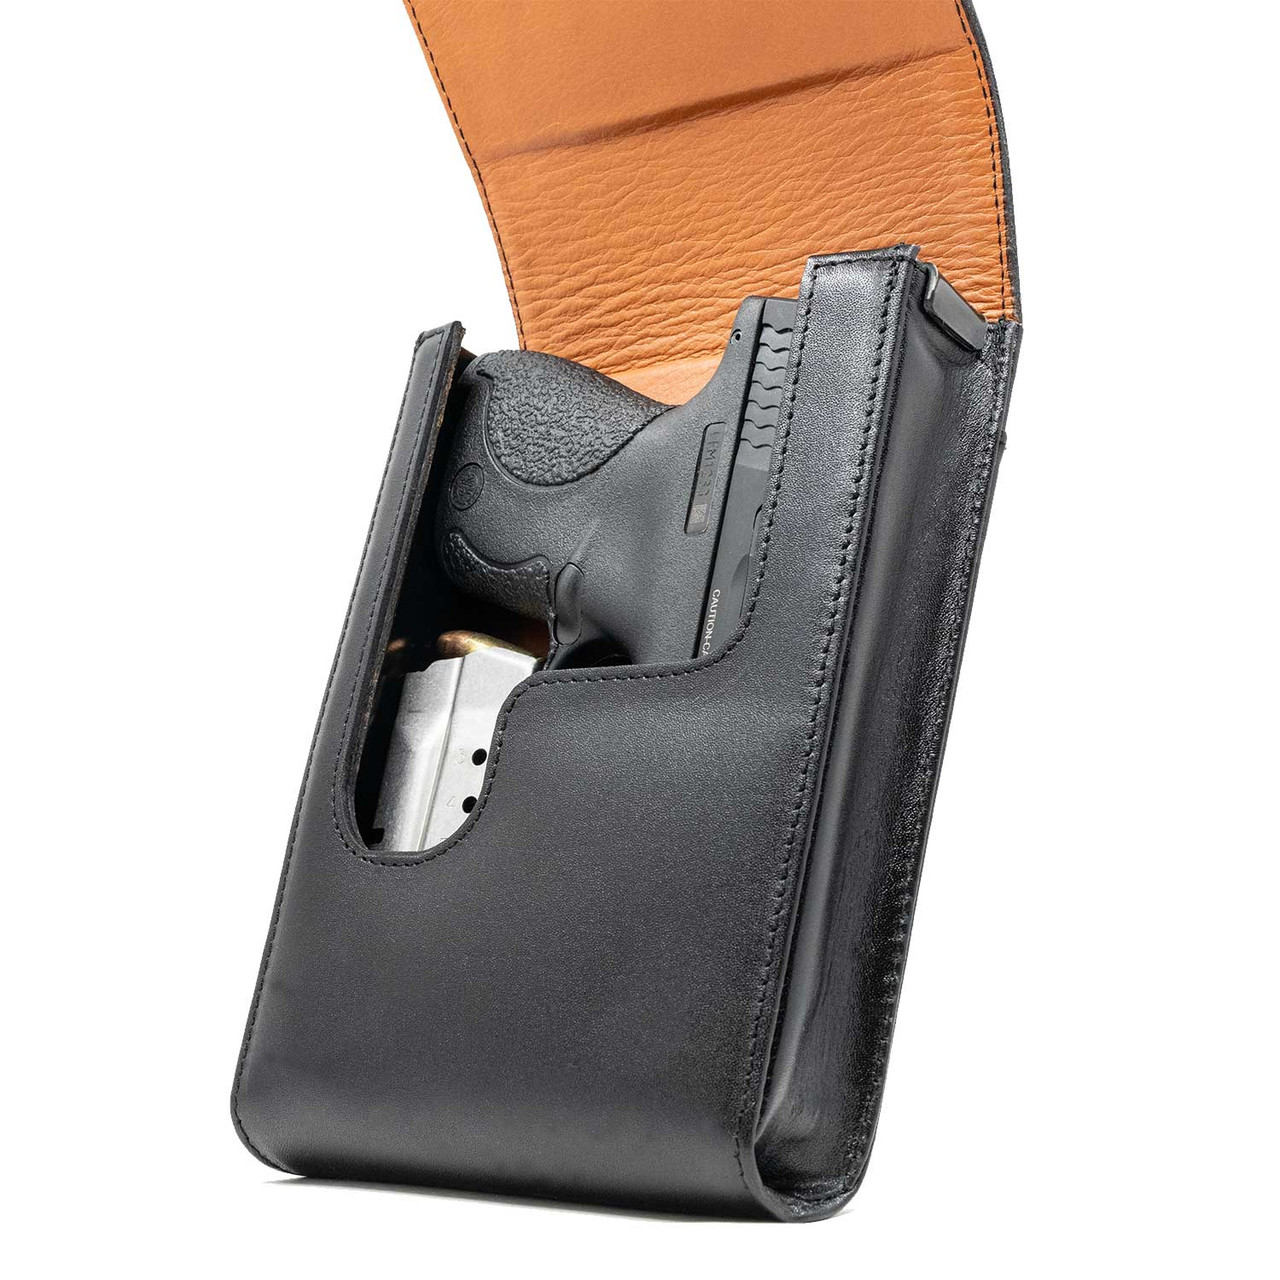 The Kimber Micro CDP .380 Xtra Mag Black Leather Holster